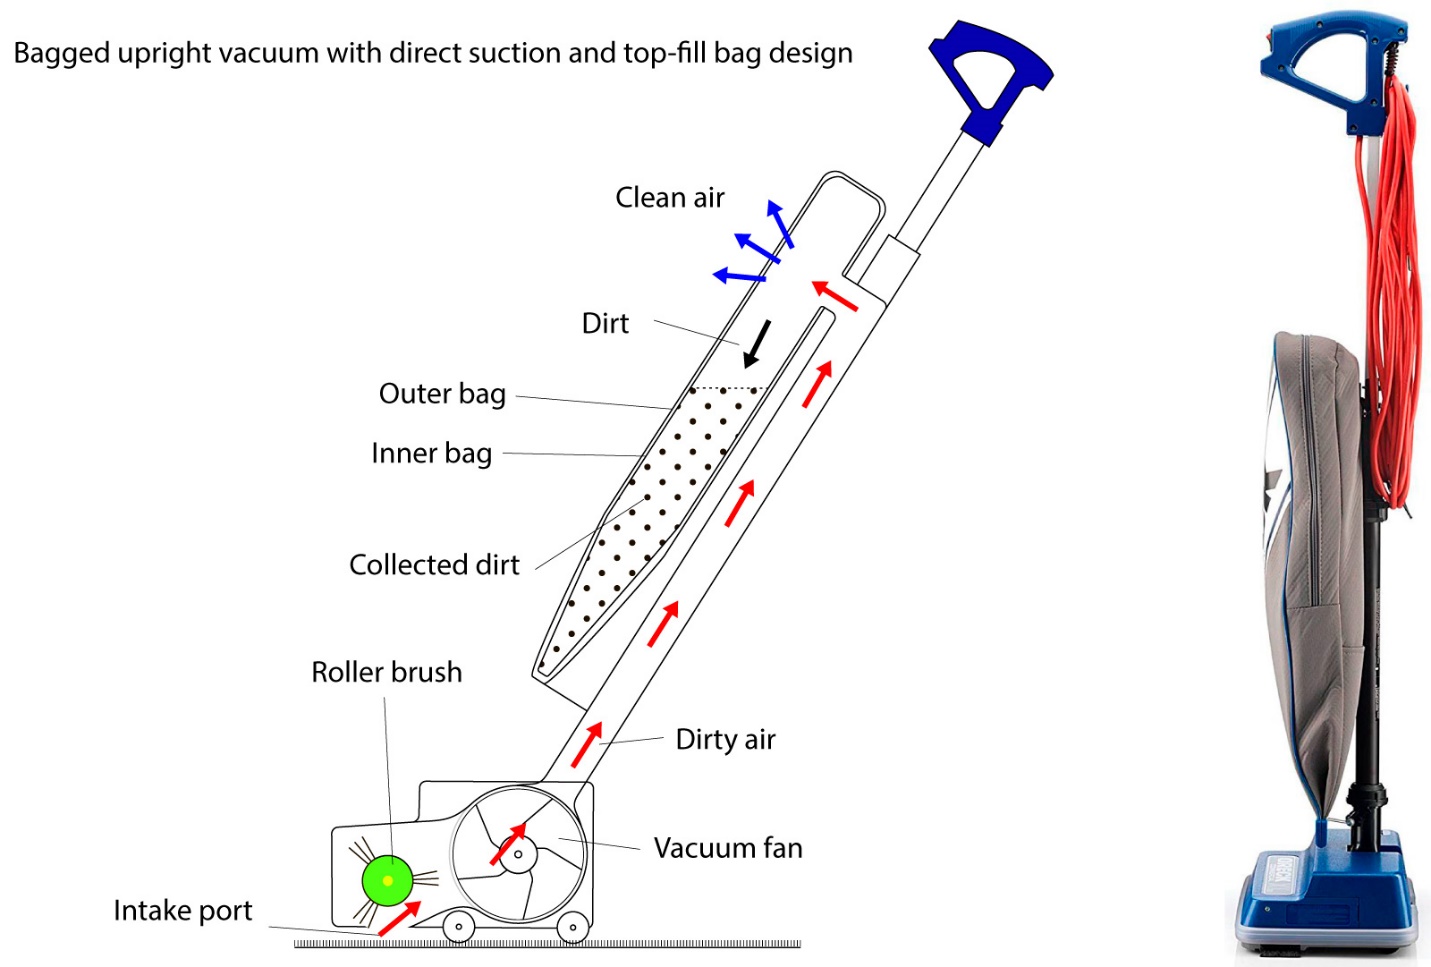 Bagged upright vacuum with direct suction and top-fill bag design